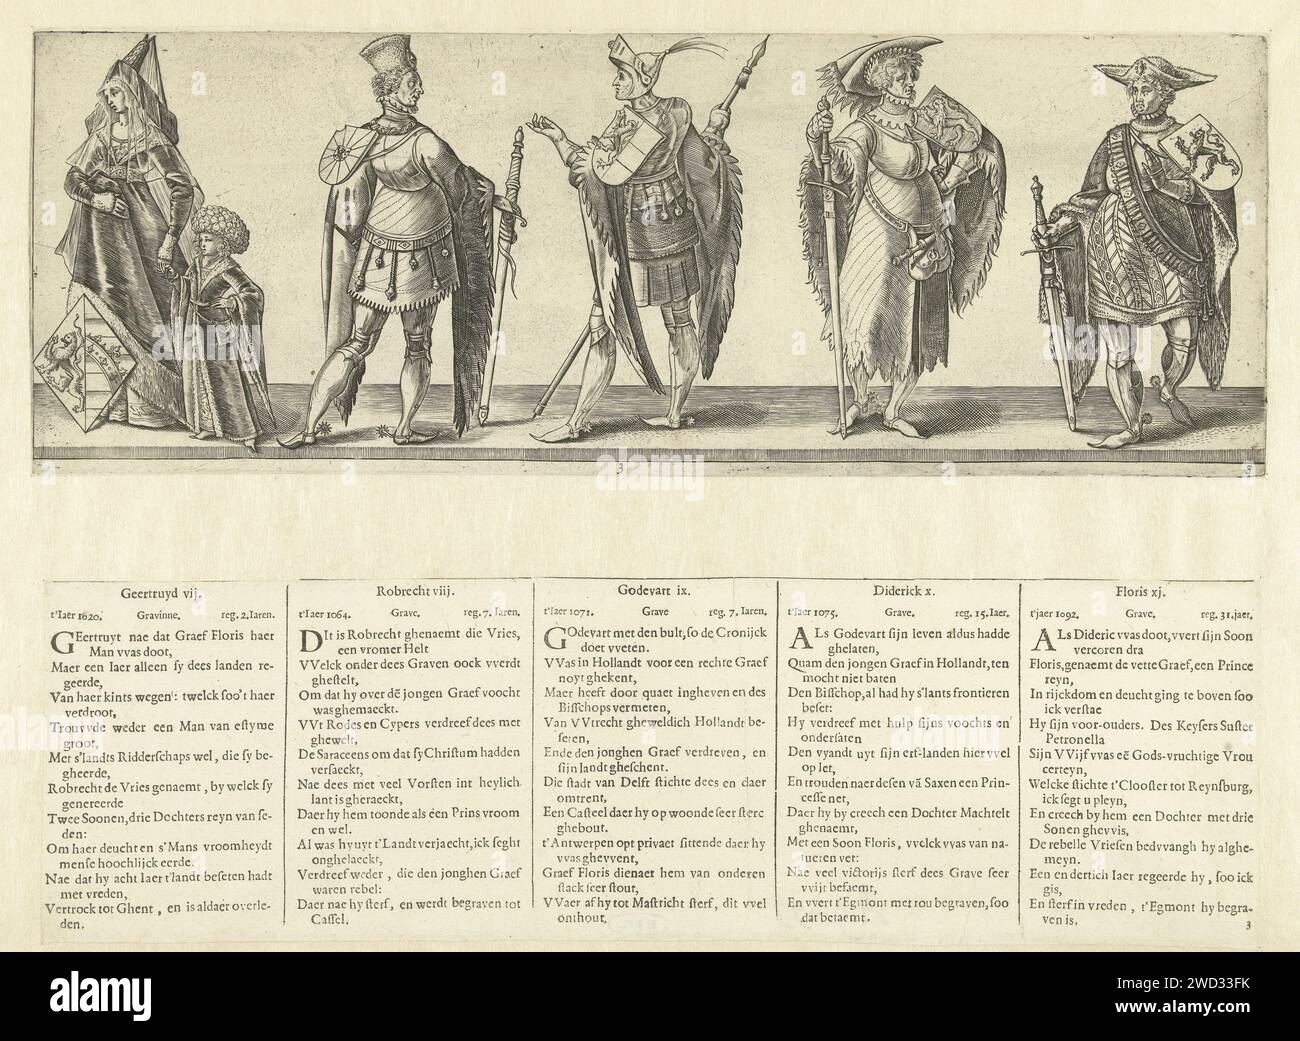 Countess Geertruida VII and Graven Robrecht VIII, Godfried IX, Dirk X and Floris XI, Hendrick Goltzius, after Willem Thibaut, 1596 - 1652 print Presentation of one woman with shield and four men with sword and shield. According to the accompanying caption, this concerns countess of Holland Geertruida VII and graves of Holland Robrecht VIII, Godfried IX, Dirk X and Floris XI (intended are Geertruida van Saxony, Robrecht I de Fries, Godfried III with the Bult, Dirk V and Floris II ). This print is part of a series of eight numbered prints of the graves and engravings of Holland with accompanying Stock Photo